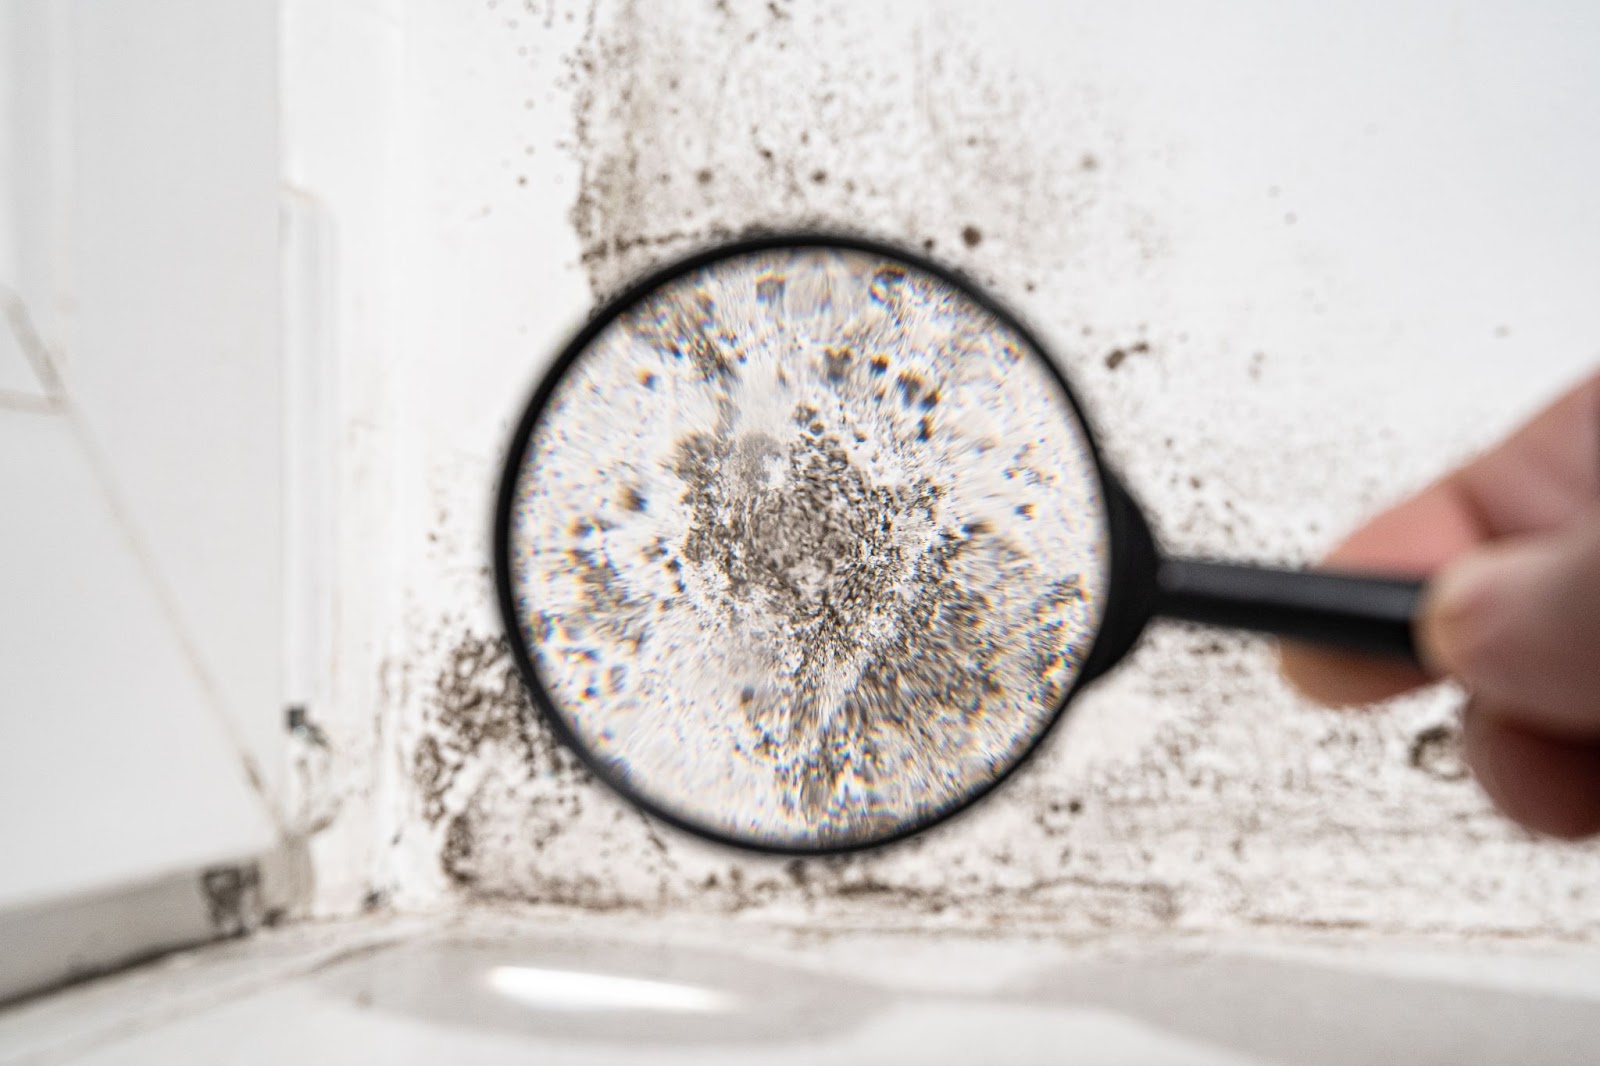 Mold remediation in NYC - combating mold spores and allergies with professional services